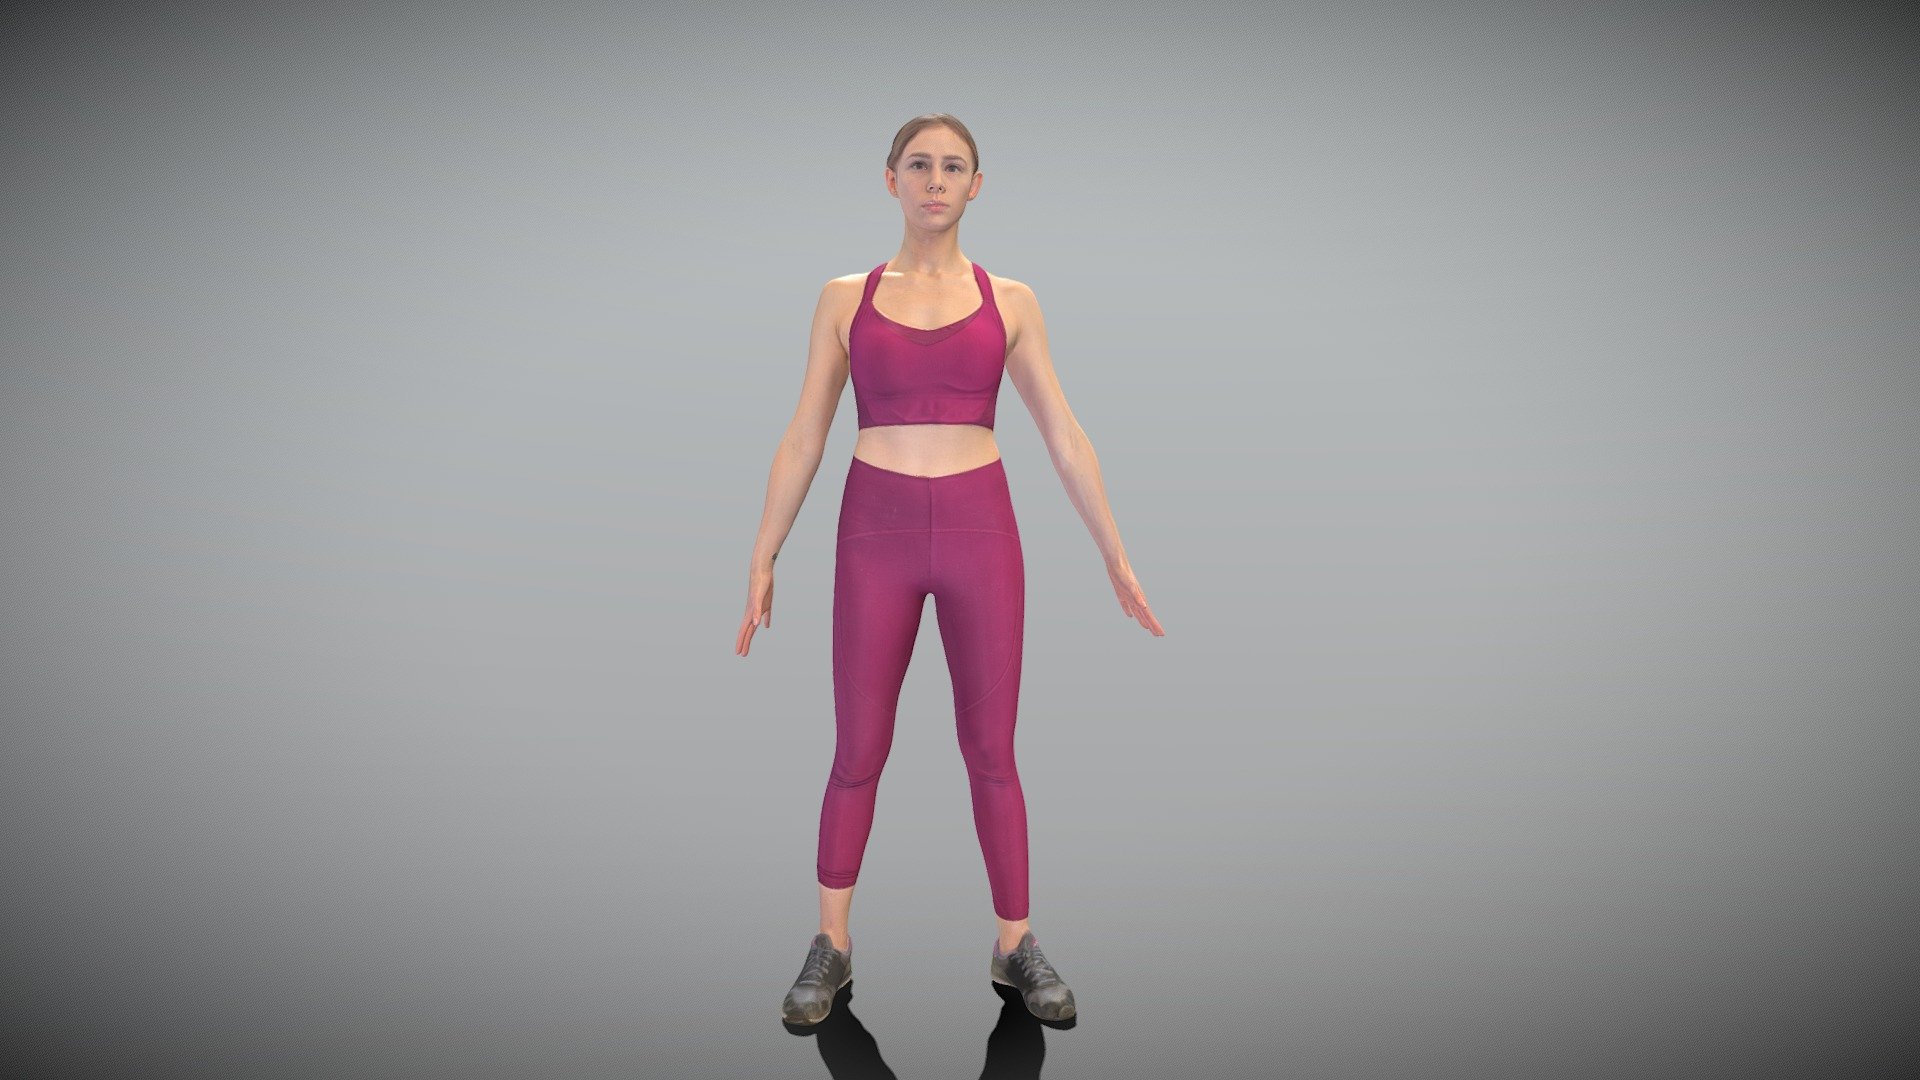 This is a true human size detailed model a beautiful young woman of Caucasian appearance dressed in sportswear. The model is captured in the A-pose with mesh ready for rigging and animation in all most usable 3d software.

Technical specifications:




digital double scan model

low-poly model

high-poly model (.ztl tool with 5-6 subdivisions) clean and retopologized automatically via ZRemesher

fully quad topology

sufficiently clean

edge Loops based

ready for subdivision

8K texture color map

non-overlapping UV map

ready for animation

PBR textures 8K resolution: Normal, Displacement, Albedo maps

Download package includes a Cinema 4D project file with Redshift shader, OBJ, FBX, STL files, which are applicable for 3ds Max, Maya, Unreal Engine, Unity, Blender, etc. All the textures you will find in the “Tex” folder, included into the main archive.

3D EVERYTHING

Stand with Ukraine! - Attractive woman in sport outfit in A-pose 394 - Buy Royalty Free 3D model by deep3dstudio 3d model